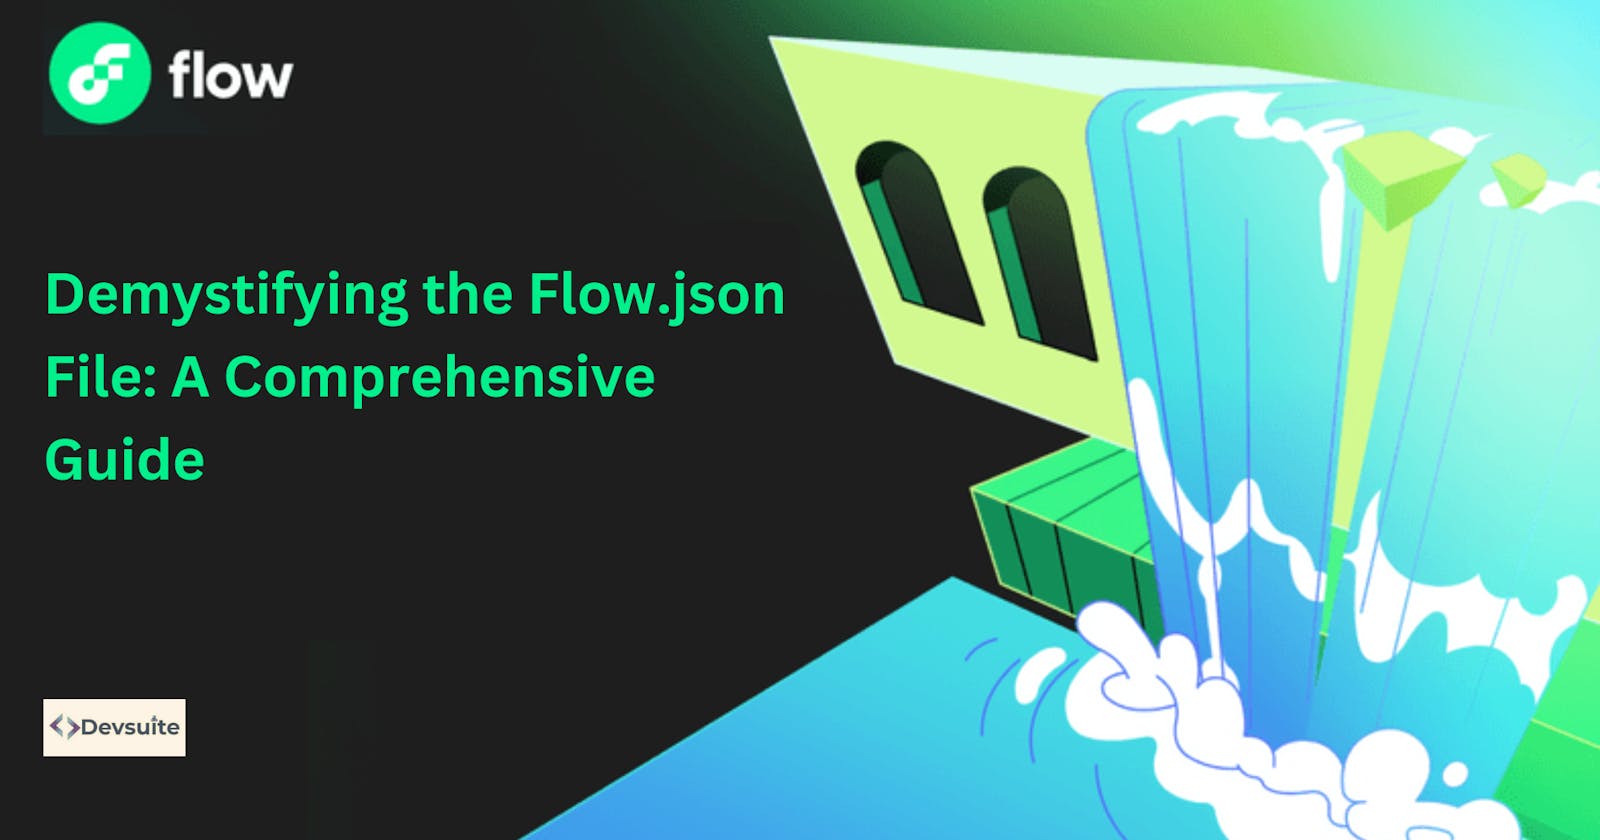 Demystifying the Flow.json File: A Comprehensive Guide